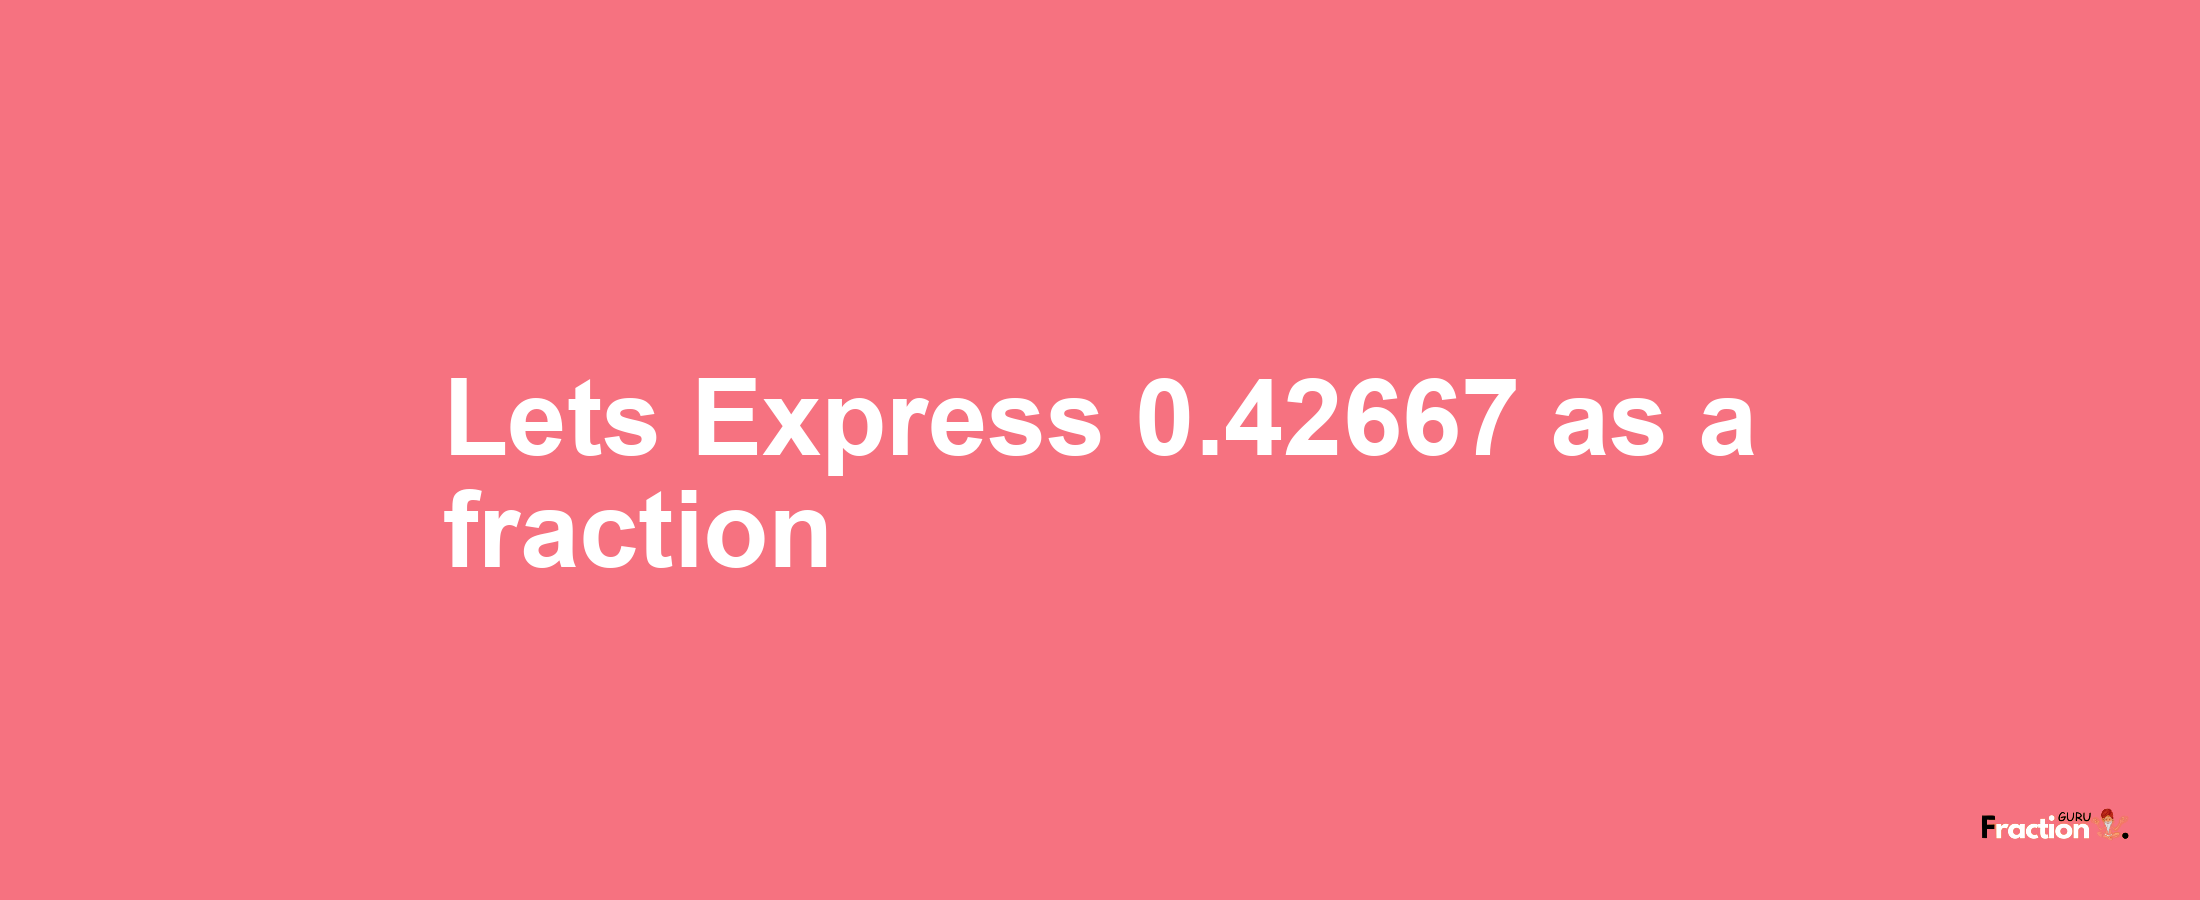 Lets Express 0.42667 as afraction